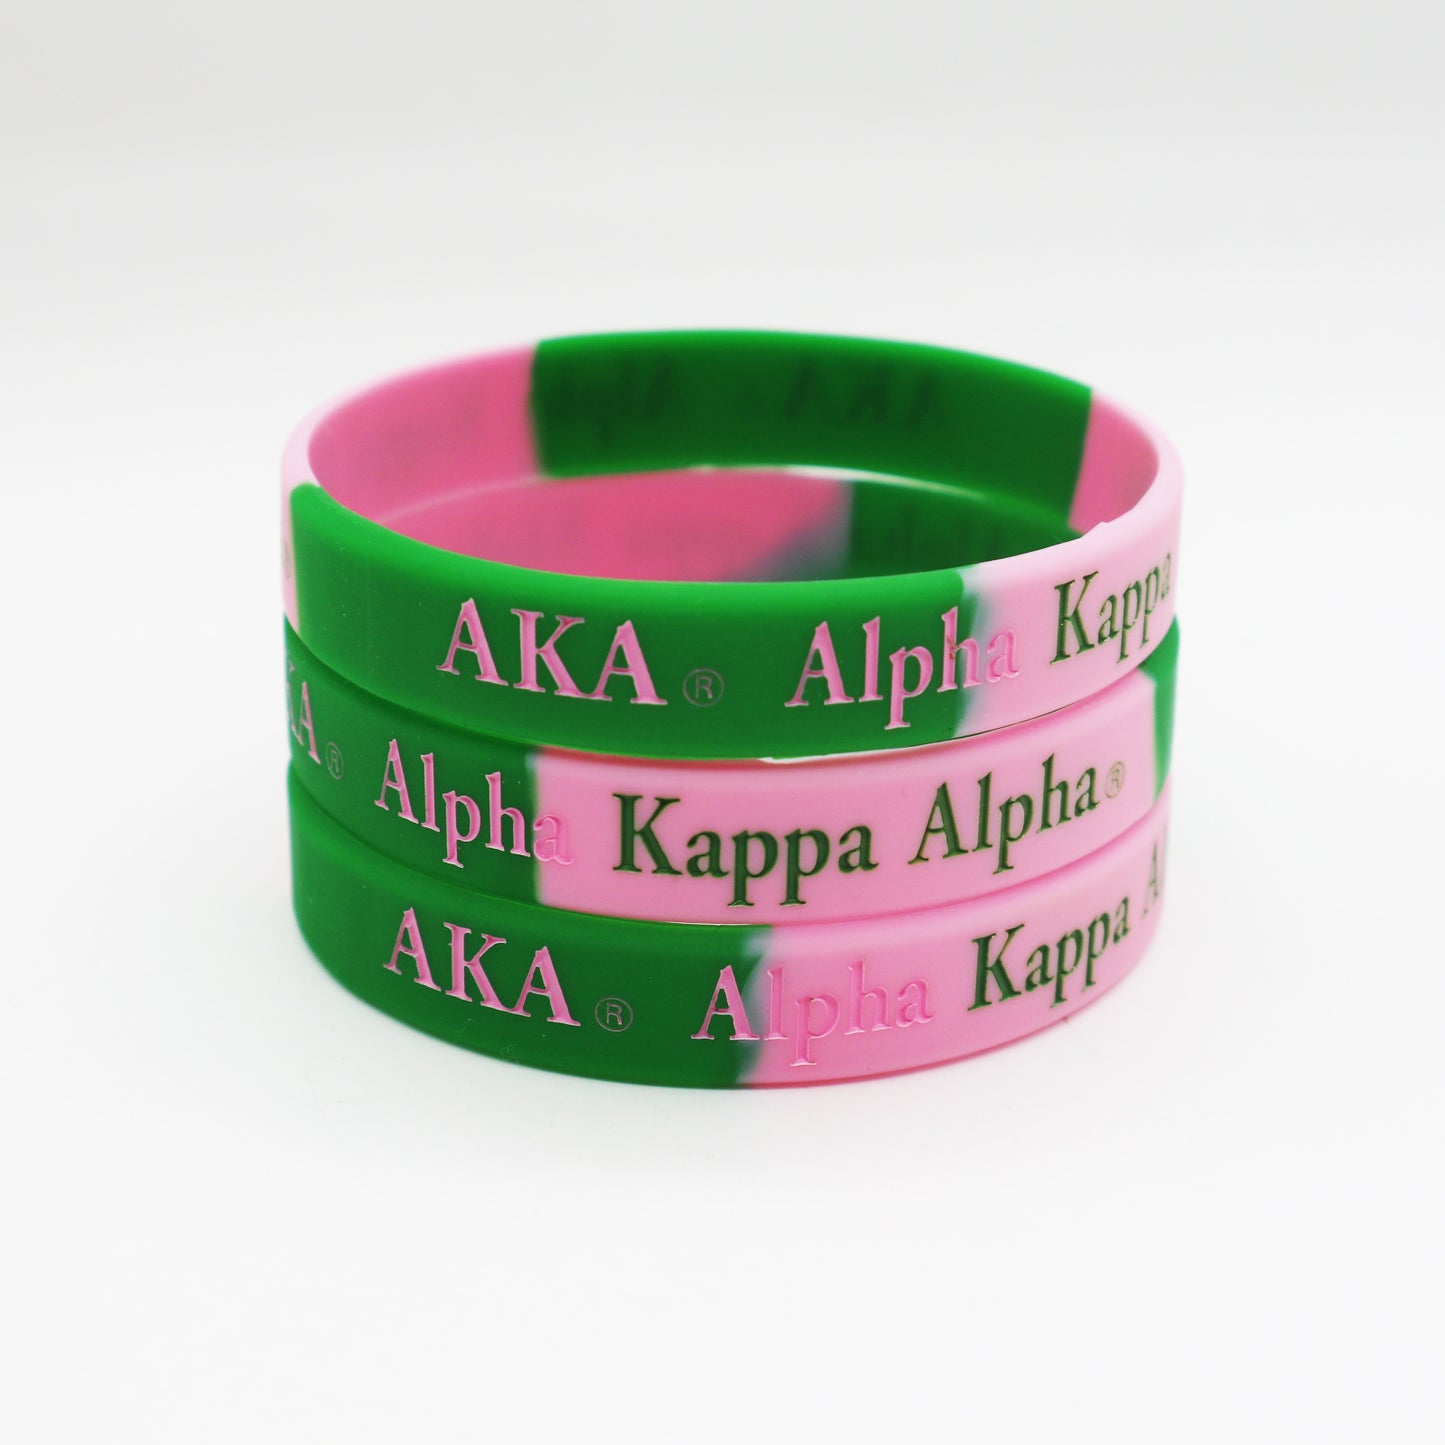 Pink and green wristband each